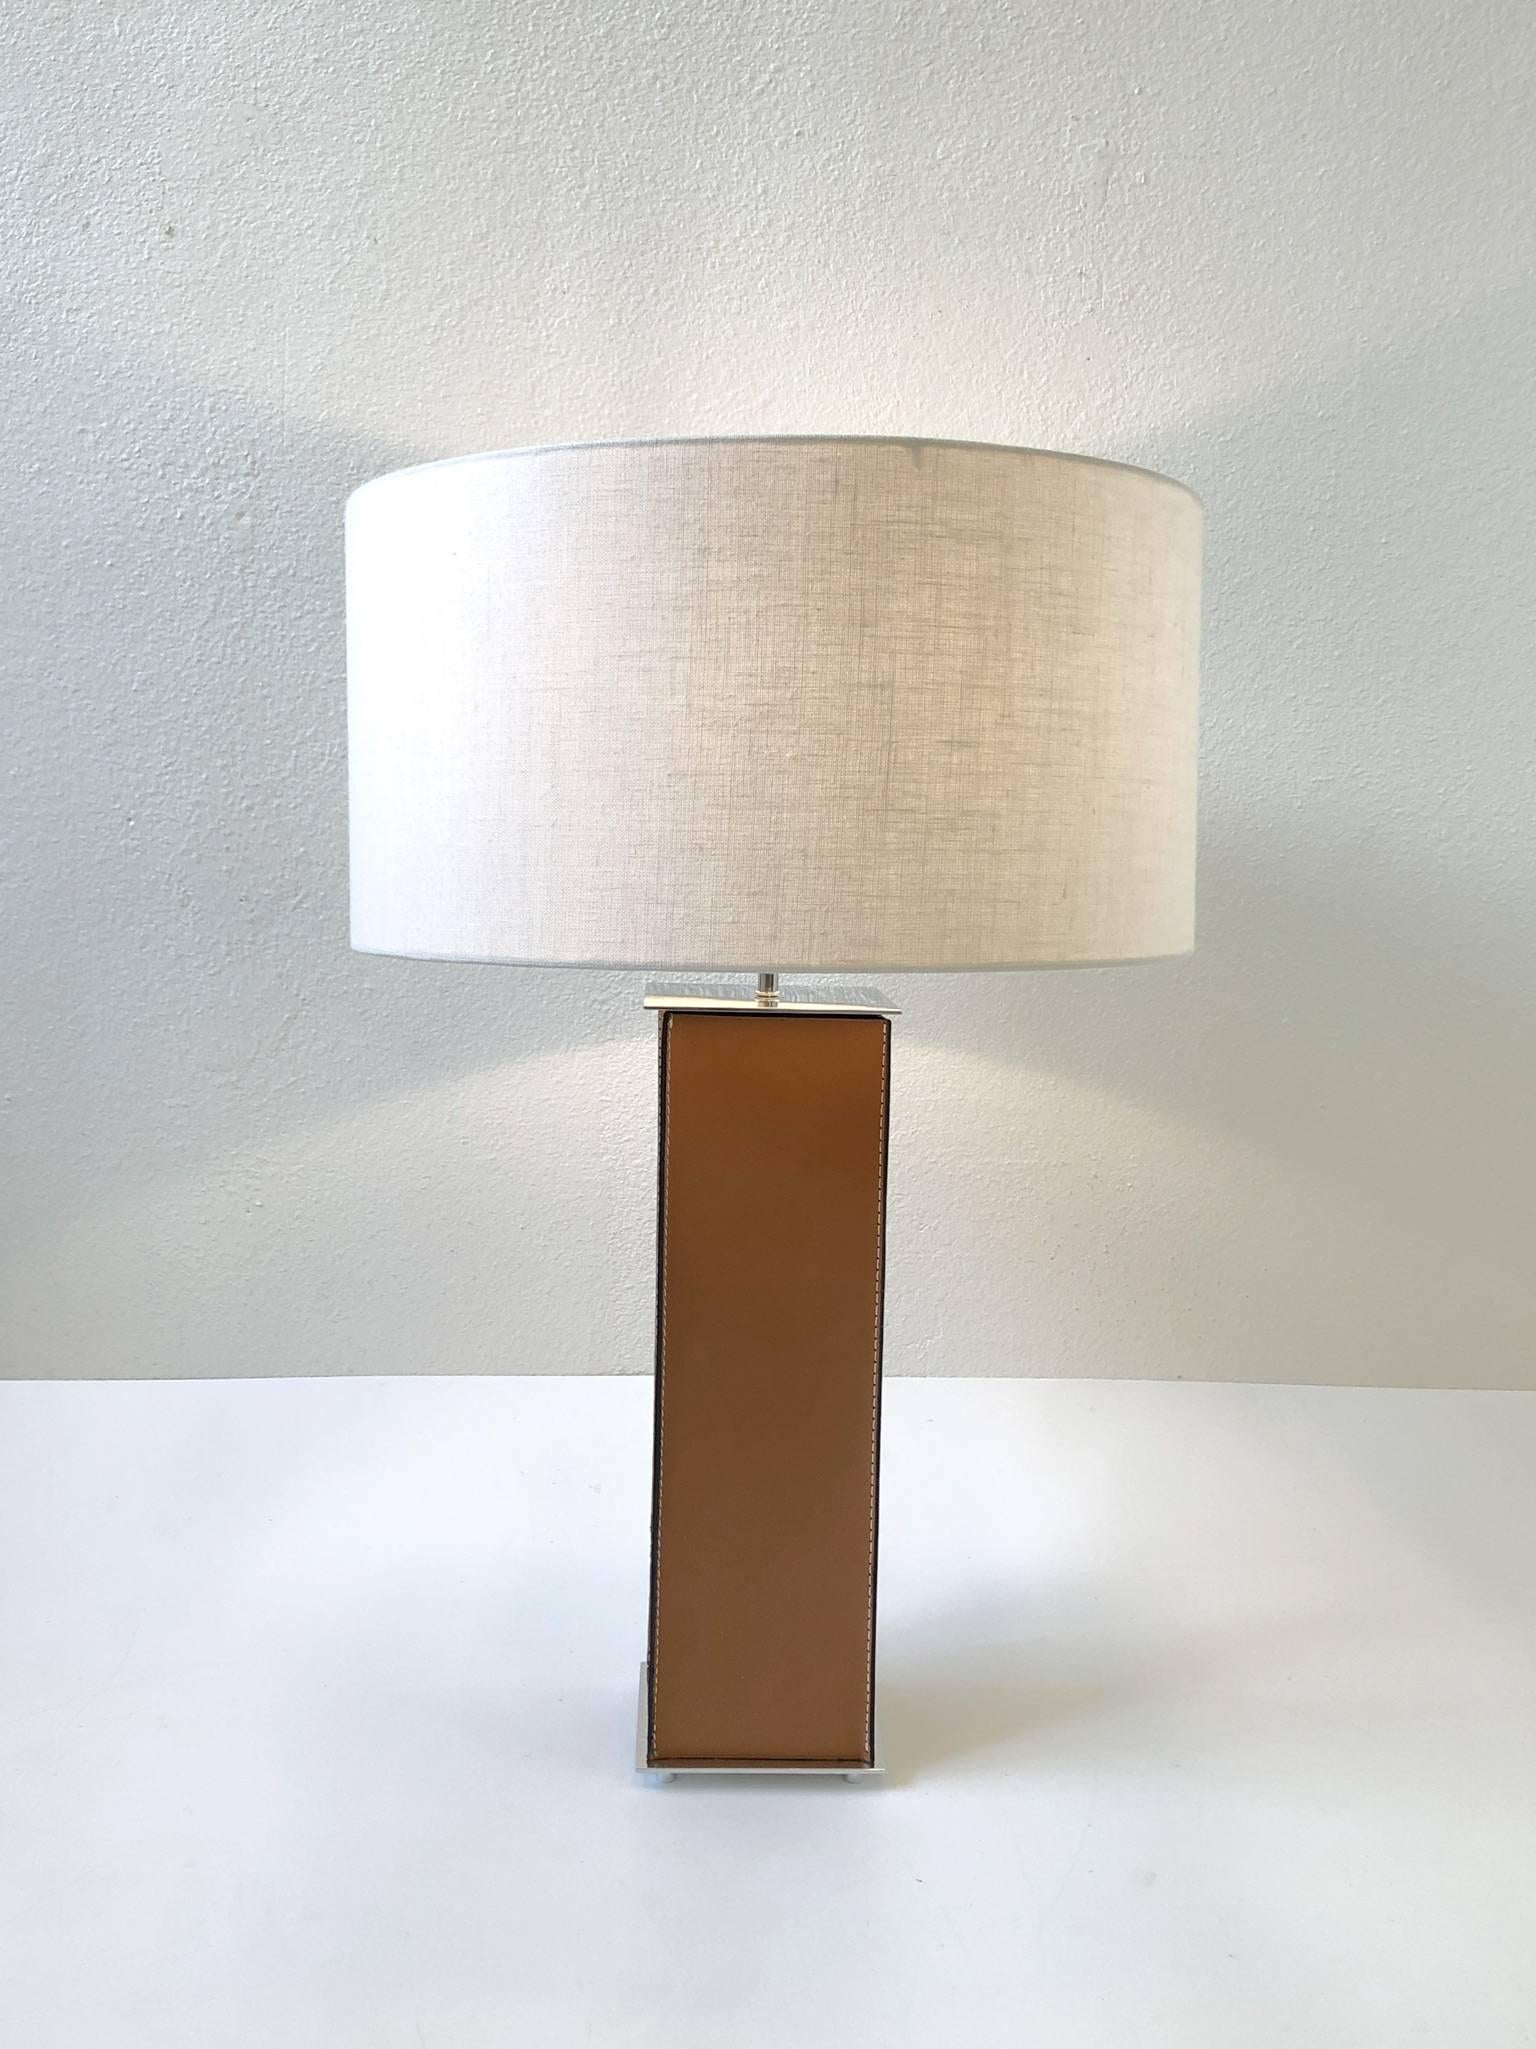 Pair of Saddle Stitch Leather Table Lamps by Laurel 1